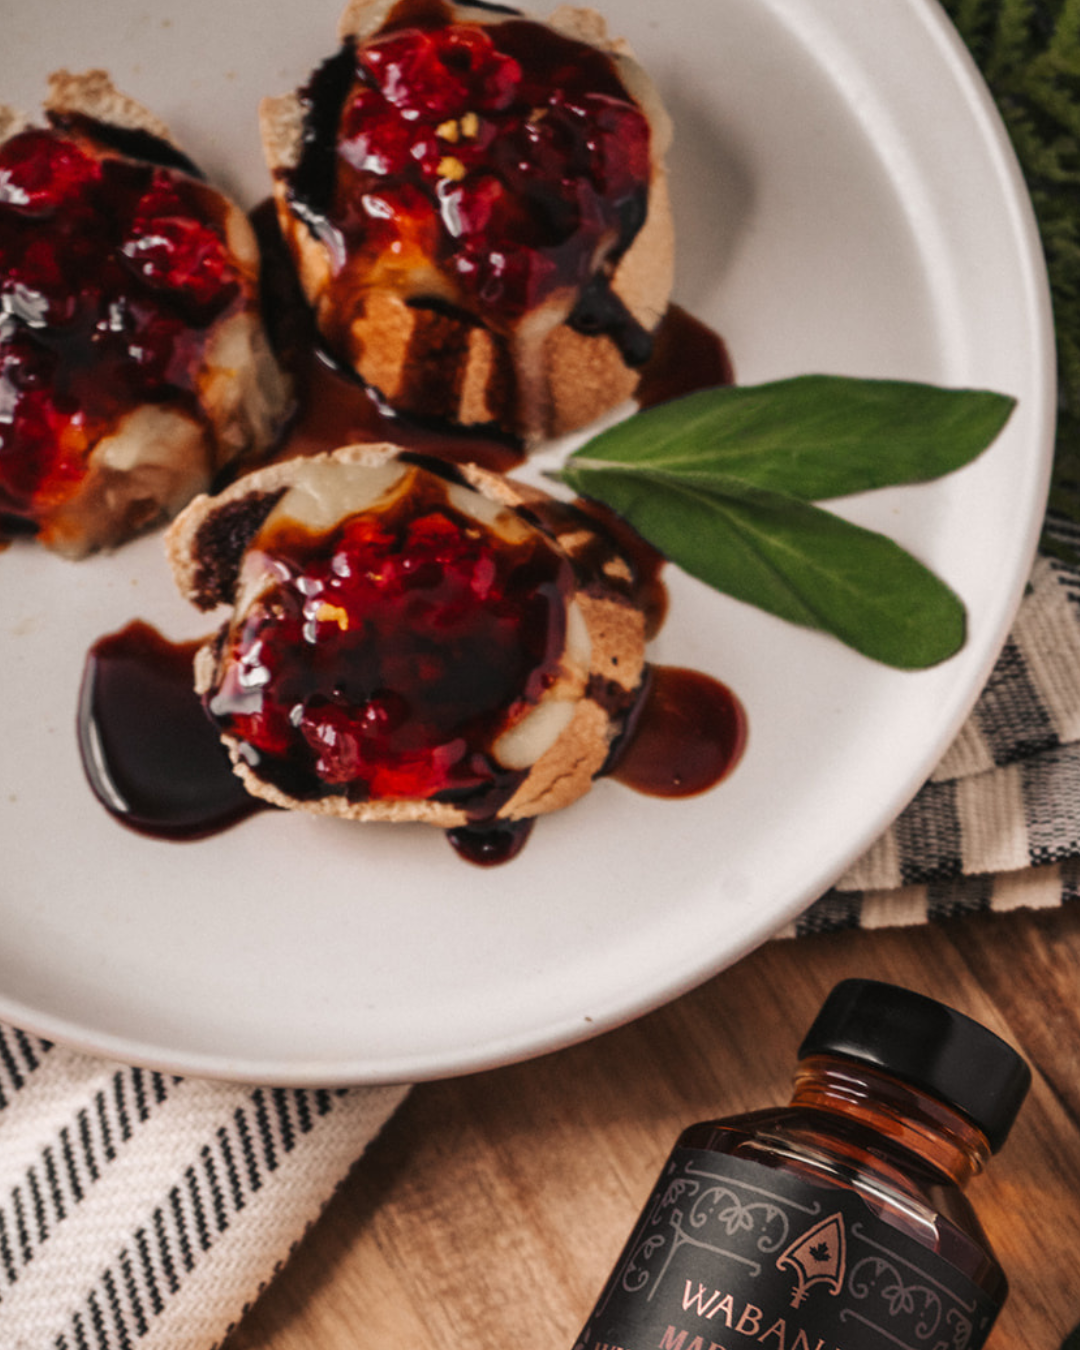 Maple Balsamic Brie pictured with Wabanaki Maple. 100% Traditional, Indigenous maple syrup